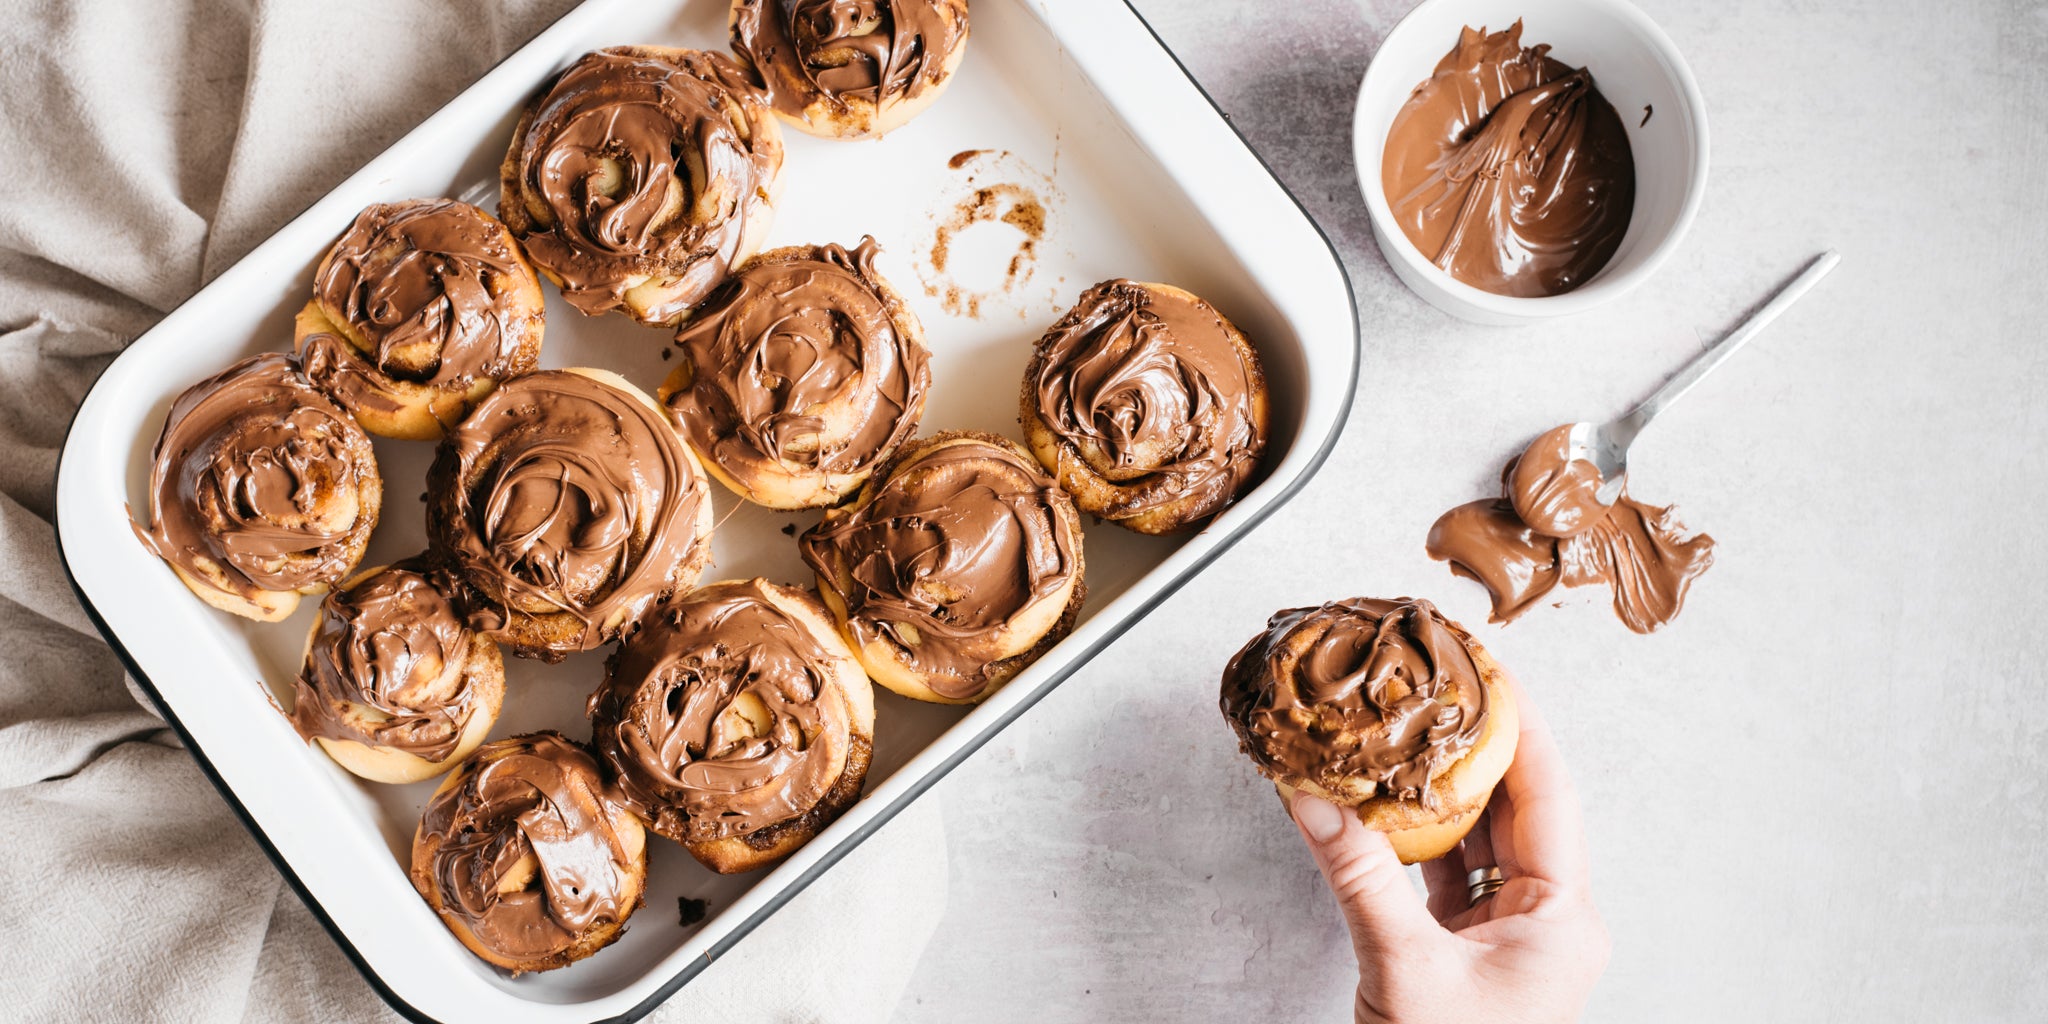 Cinnamon Rolls with a rich, thick Nutella topping